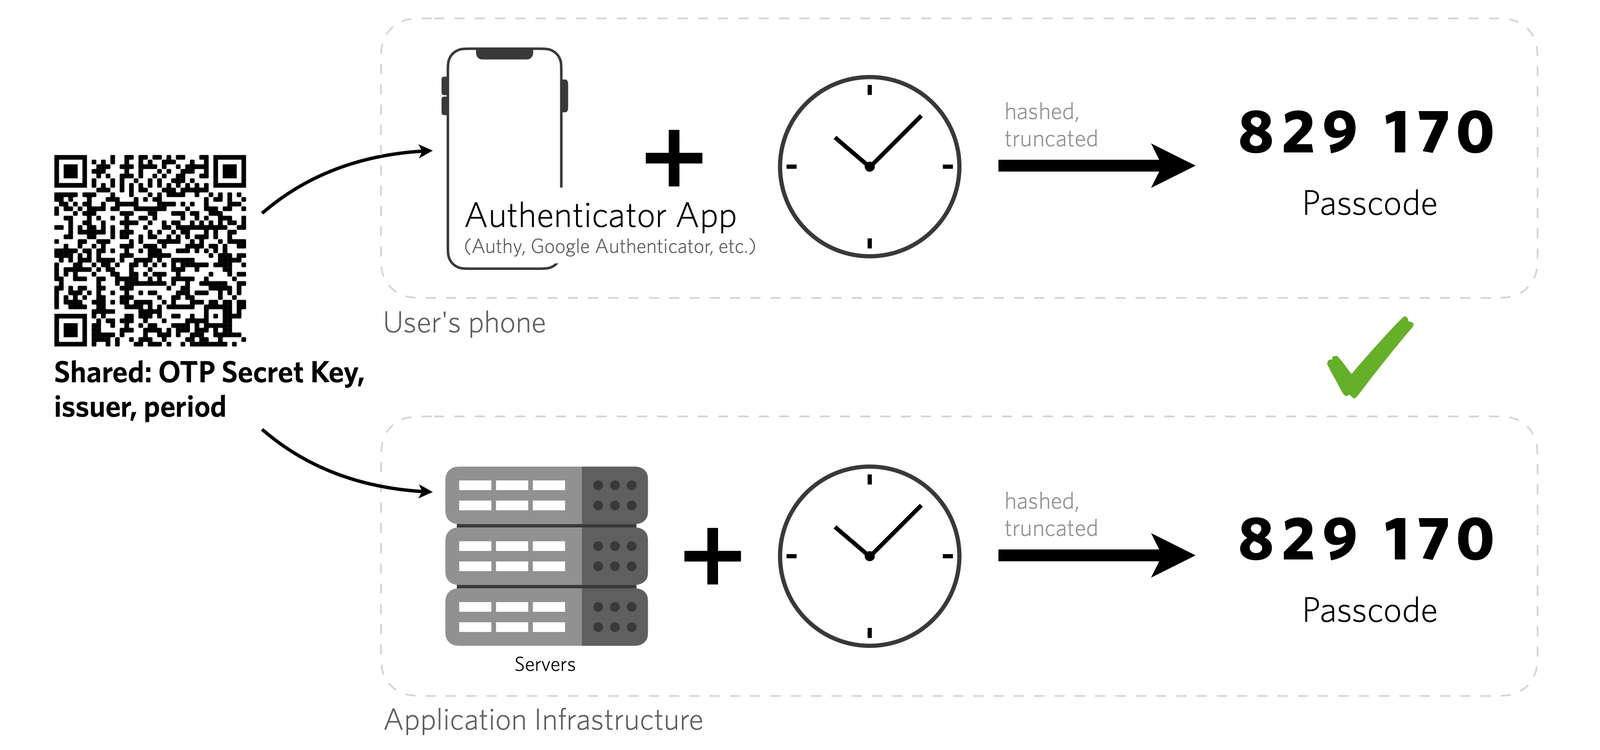 TOTP algorithm diagram showing authenticator app and application infrastructure plus system time to create the same passcode.